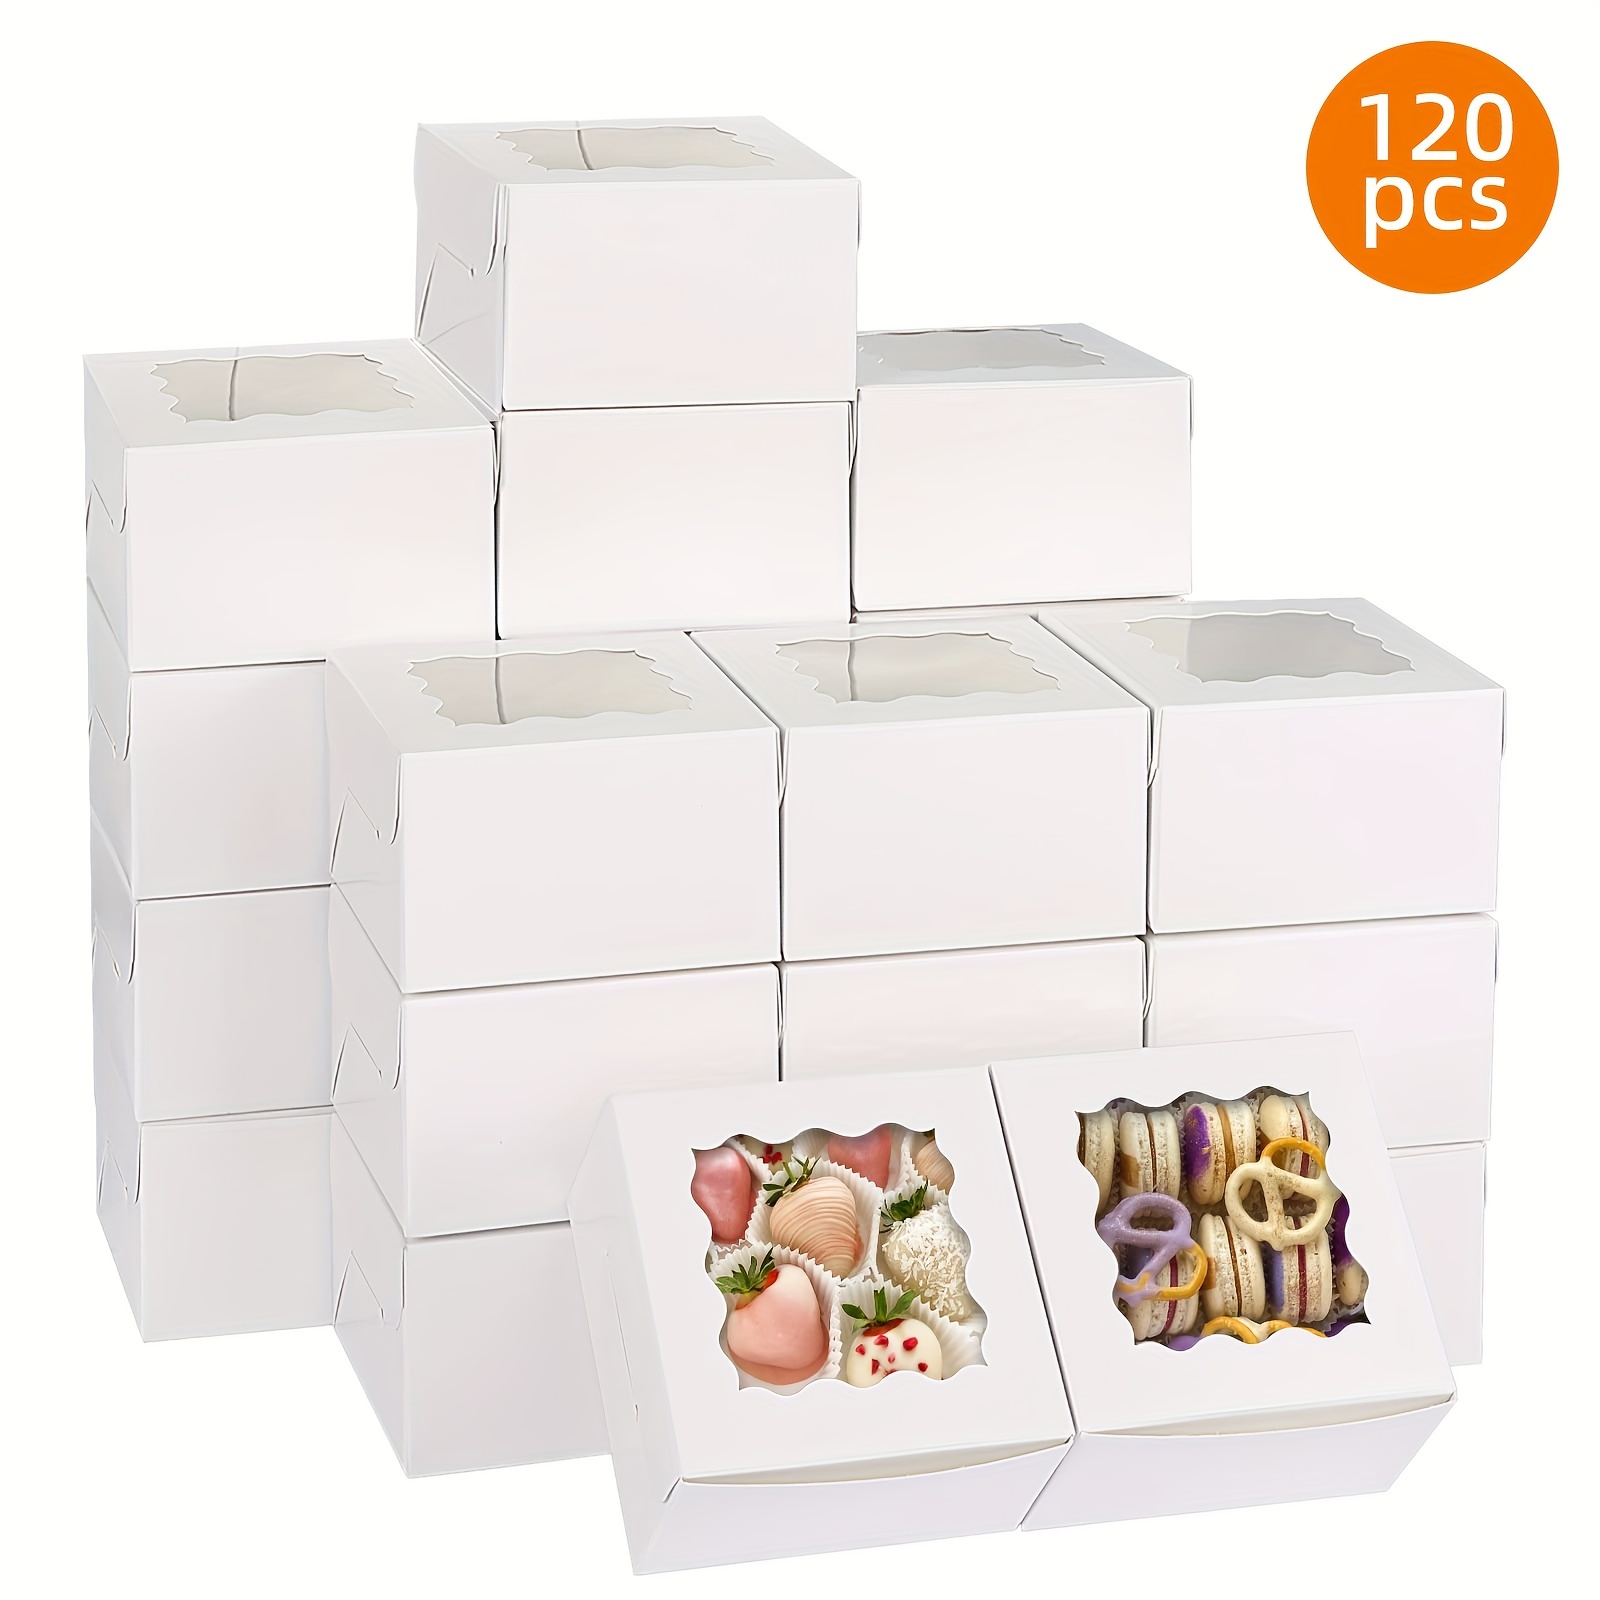 

120pcs Cupcake Boxes With Clear Window, 4x4x2.5 Inch Cookie Boxes Bakery Boxes, Mini Cake Boxes, Small Boxes For Donuts, Candy, Biscuits, Cupcakes And Donuts